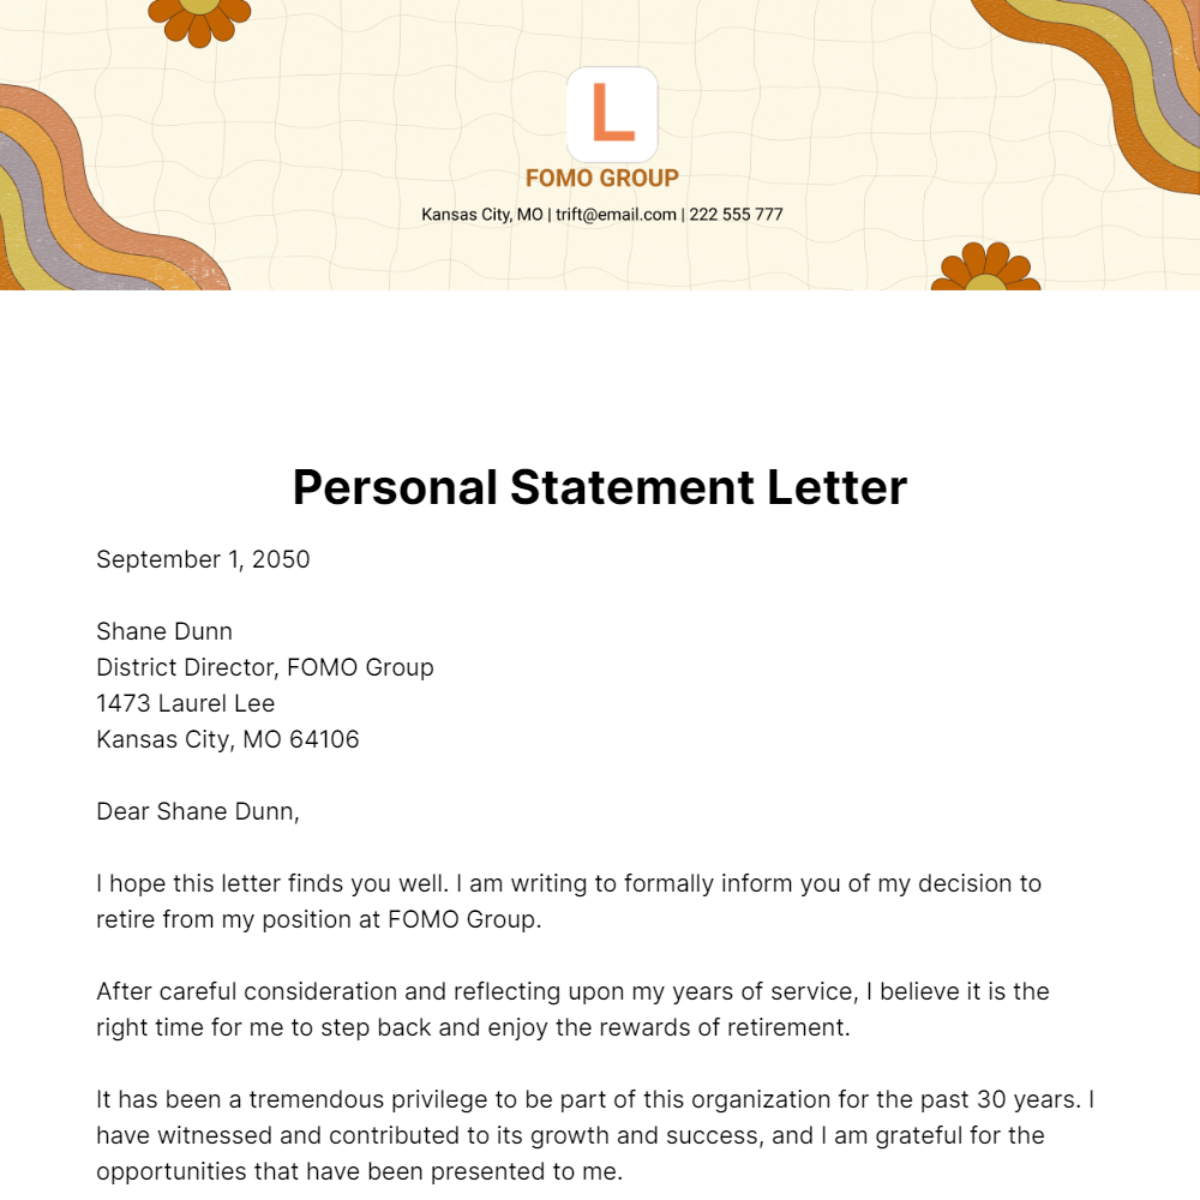 Personal Statement Letter Template